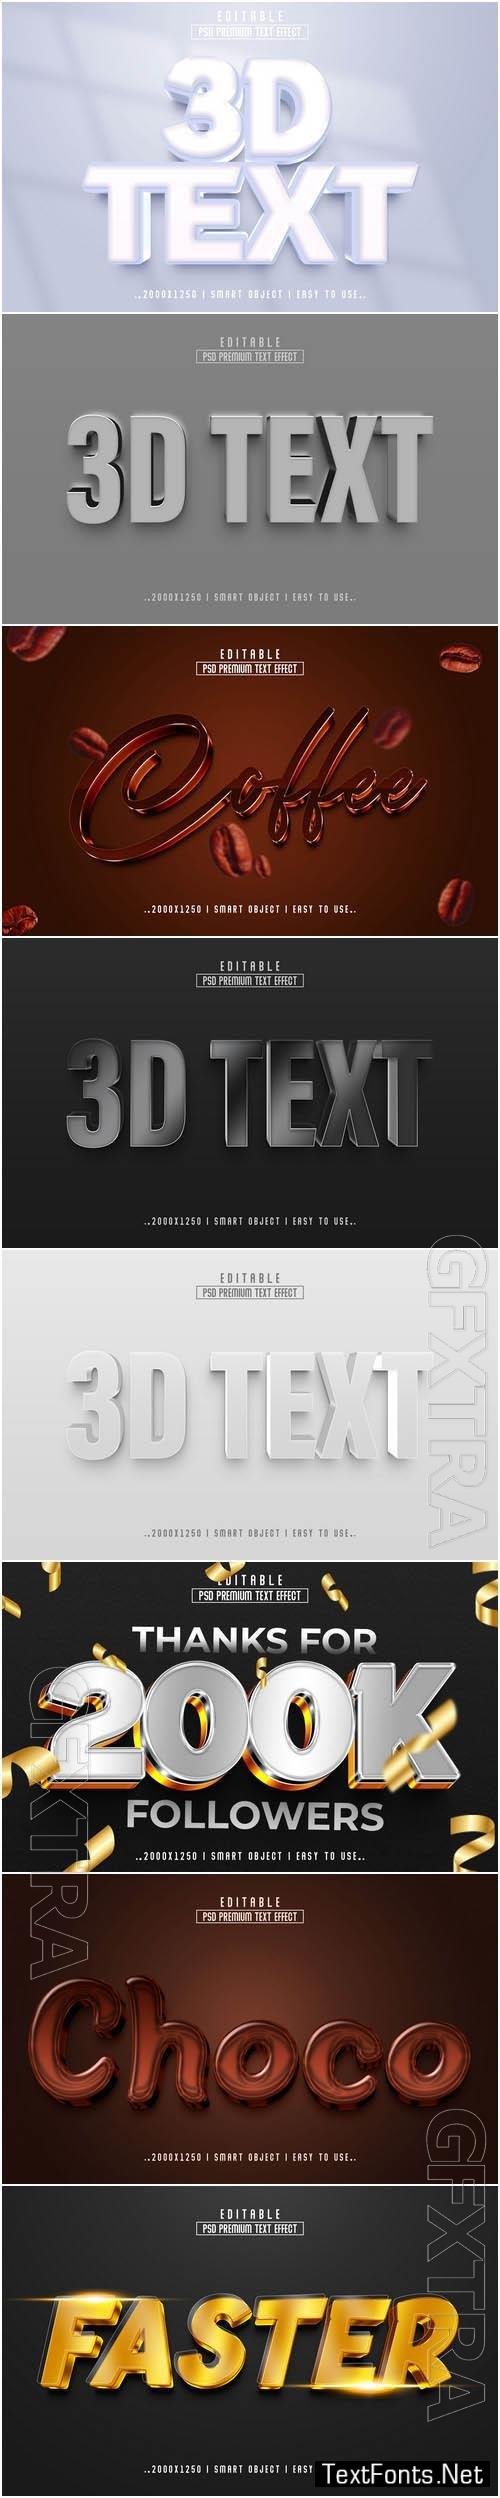 photoshop save text style